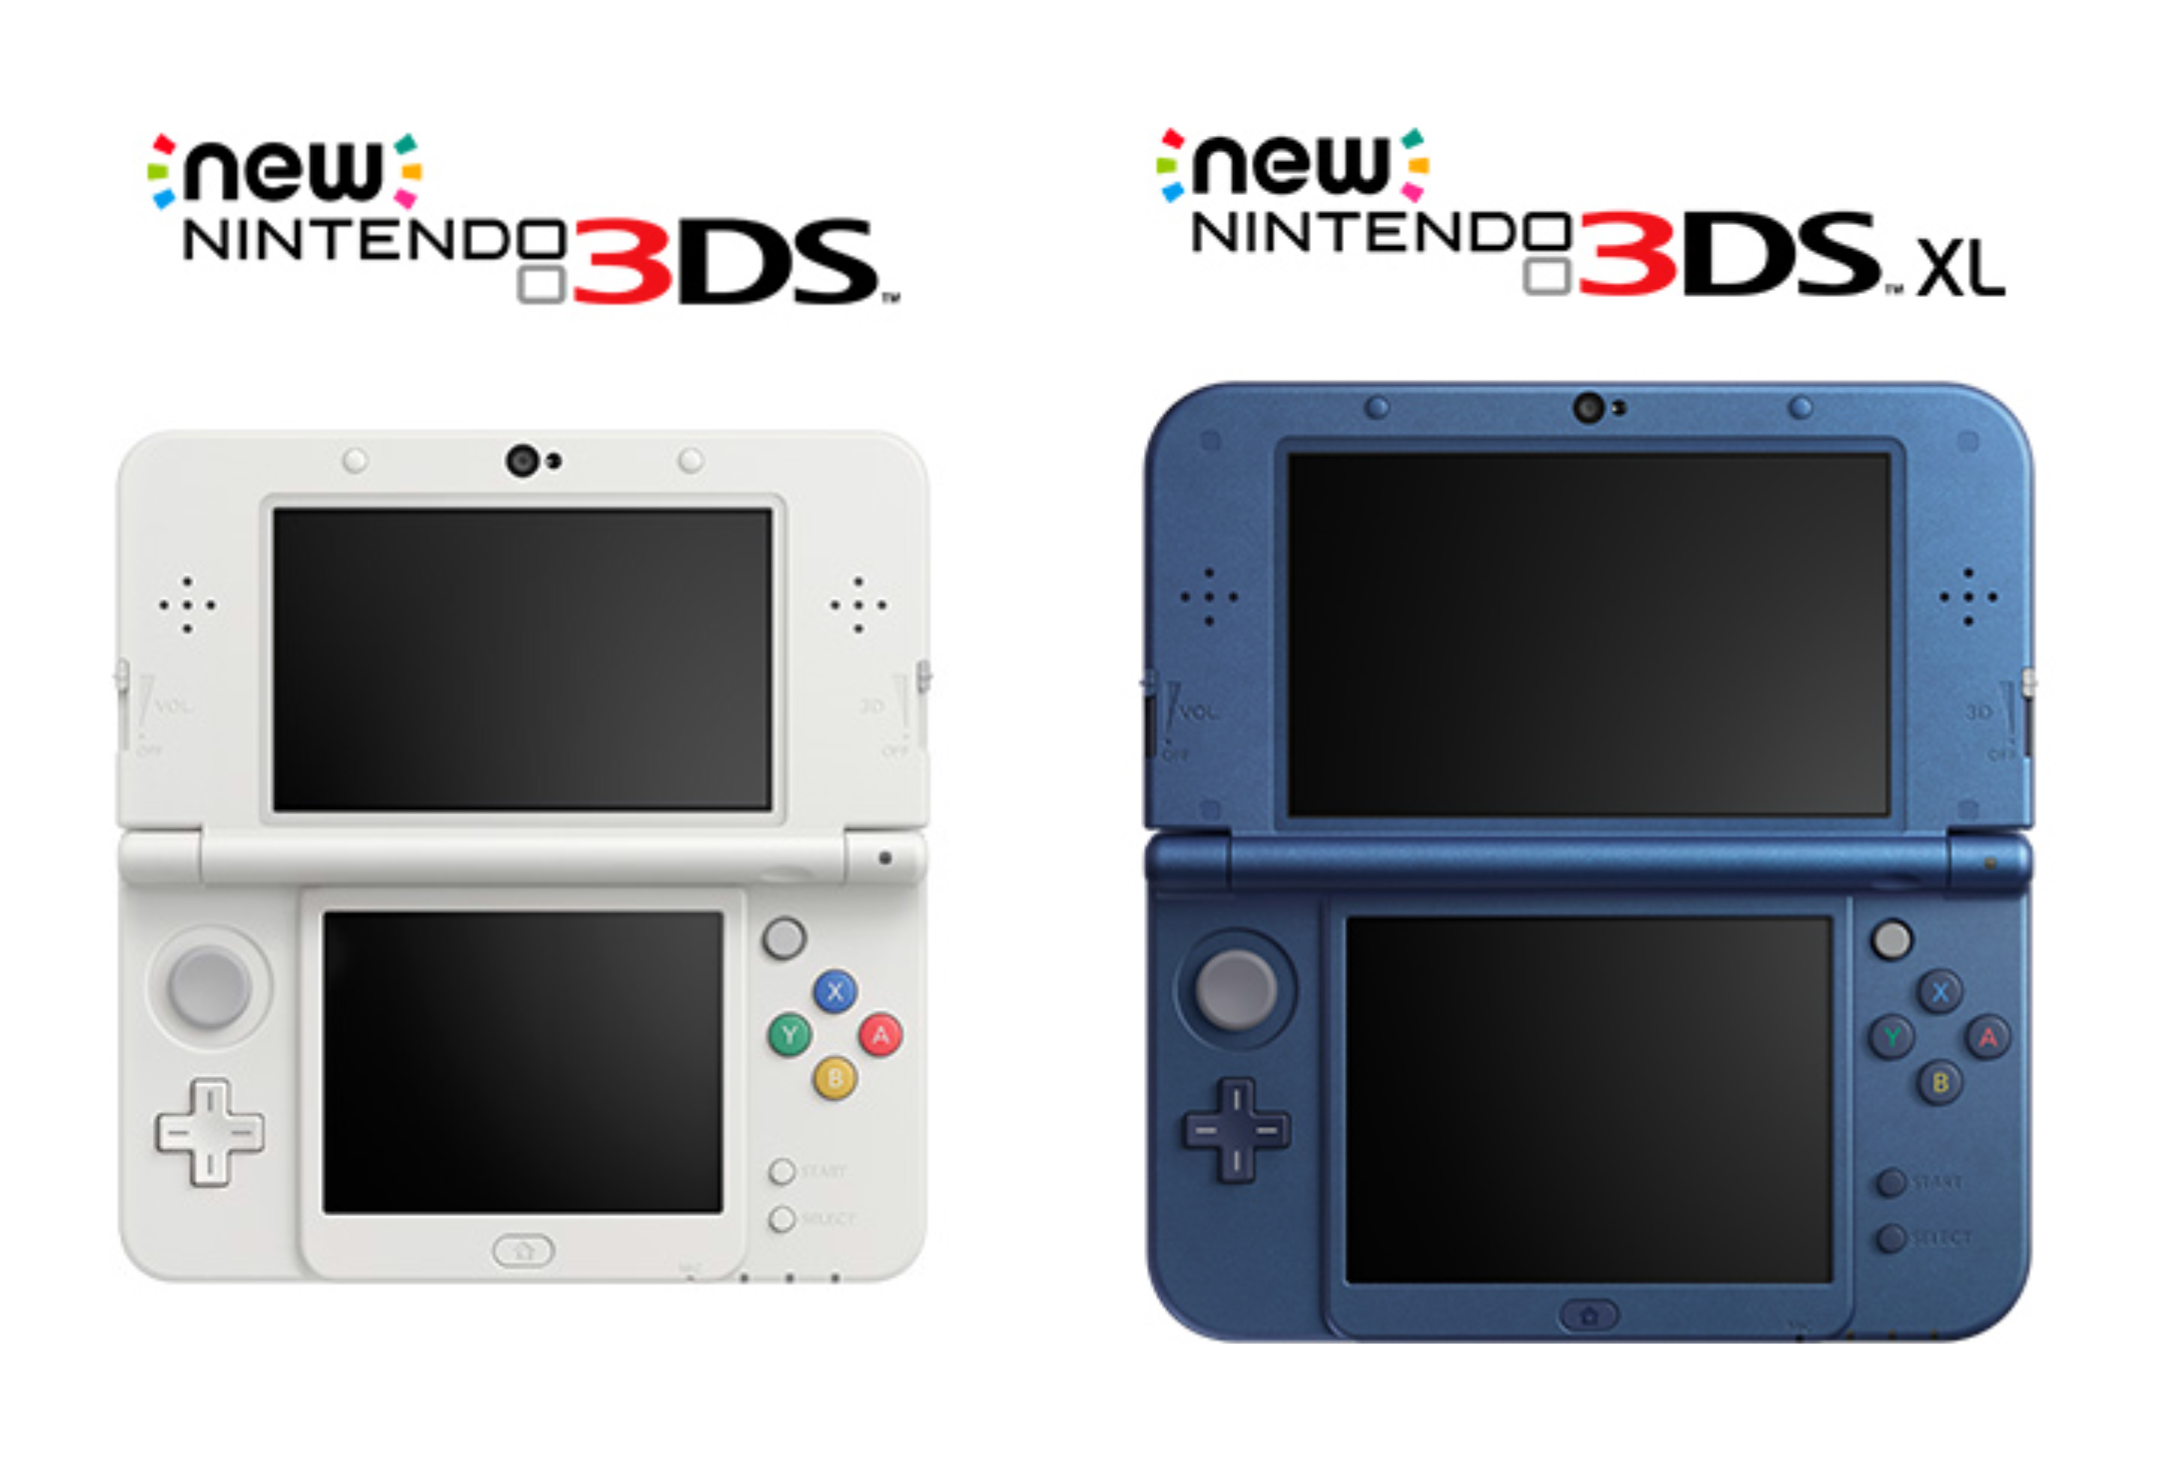 Nintendo Announces New 3DS and New 3DS LL » Fanboy.com